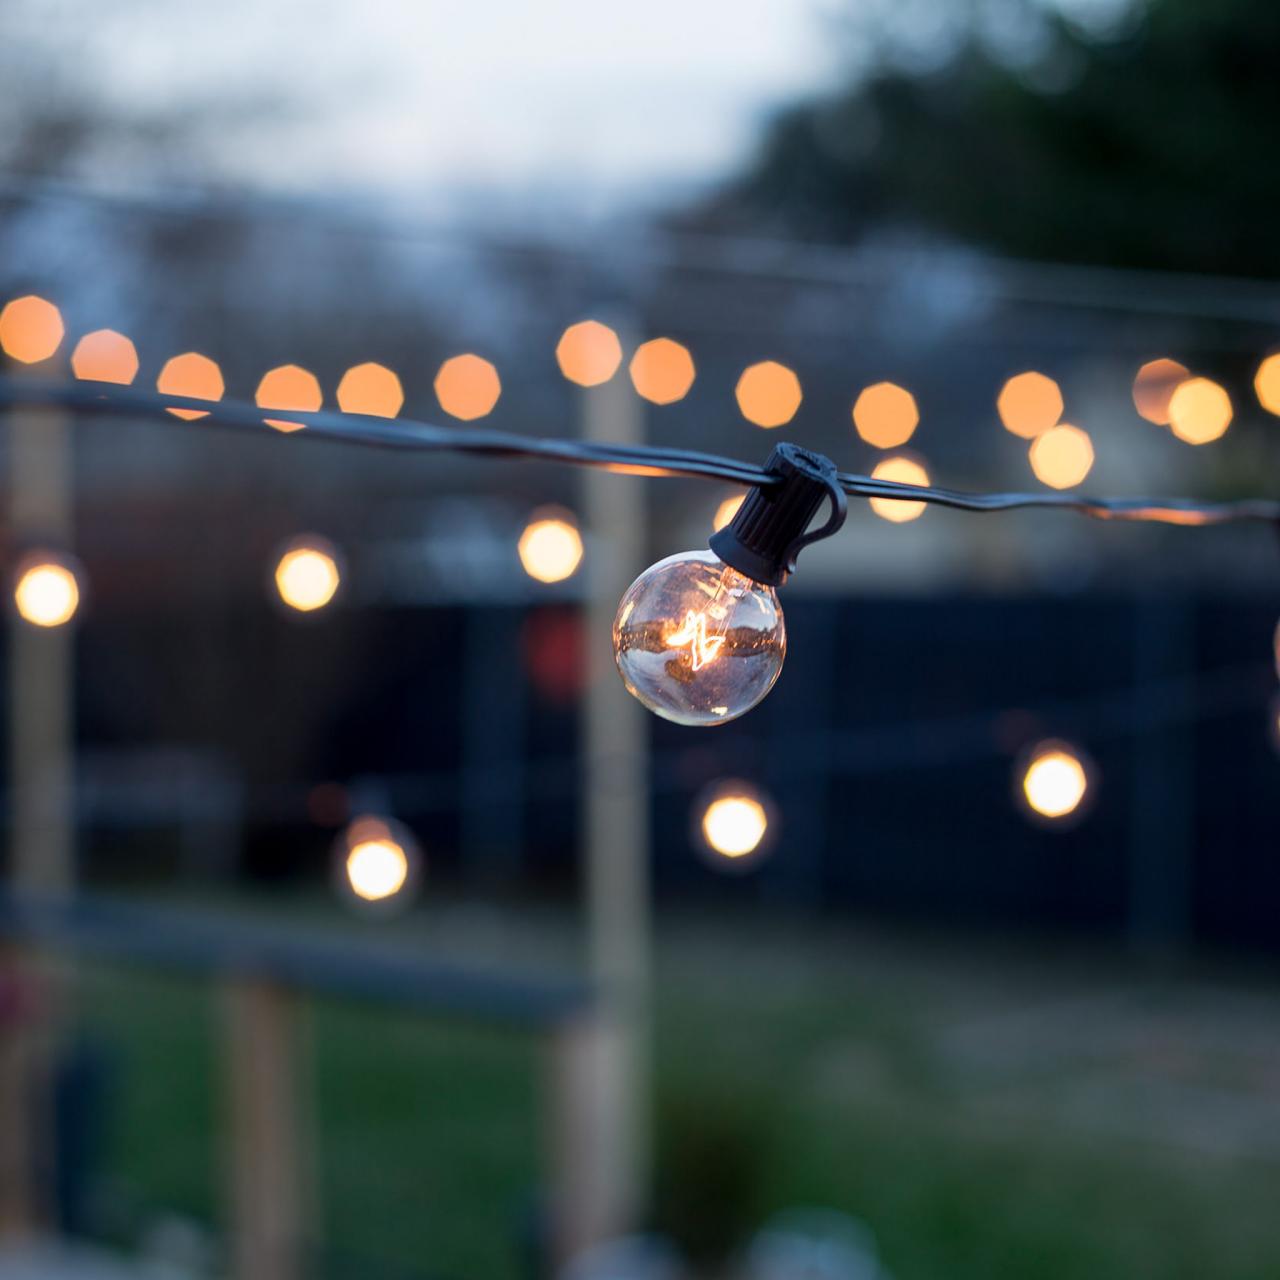 How to Hang Outdoor String Lights From DIY Posts